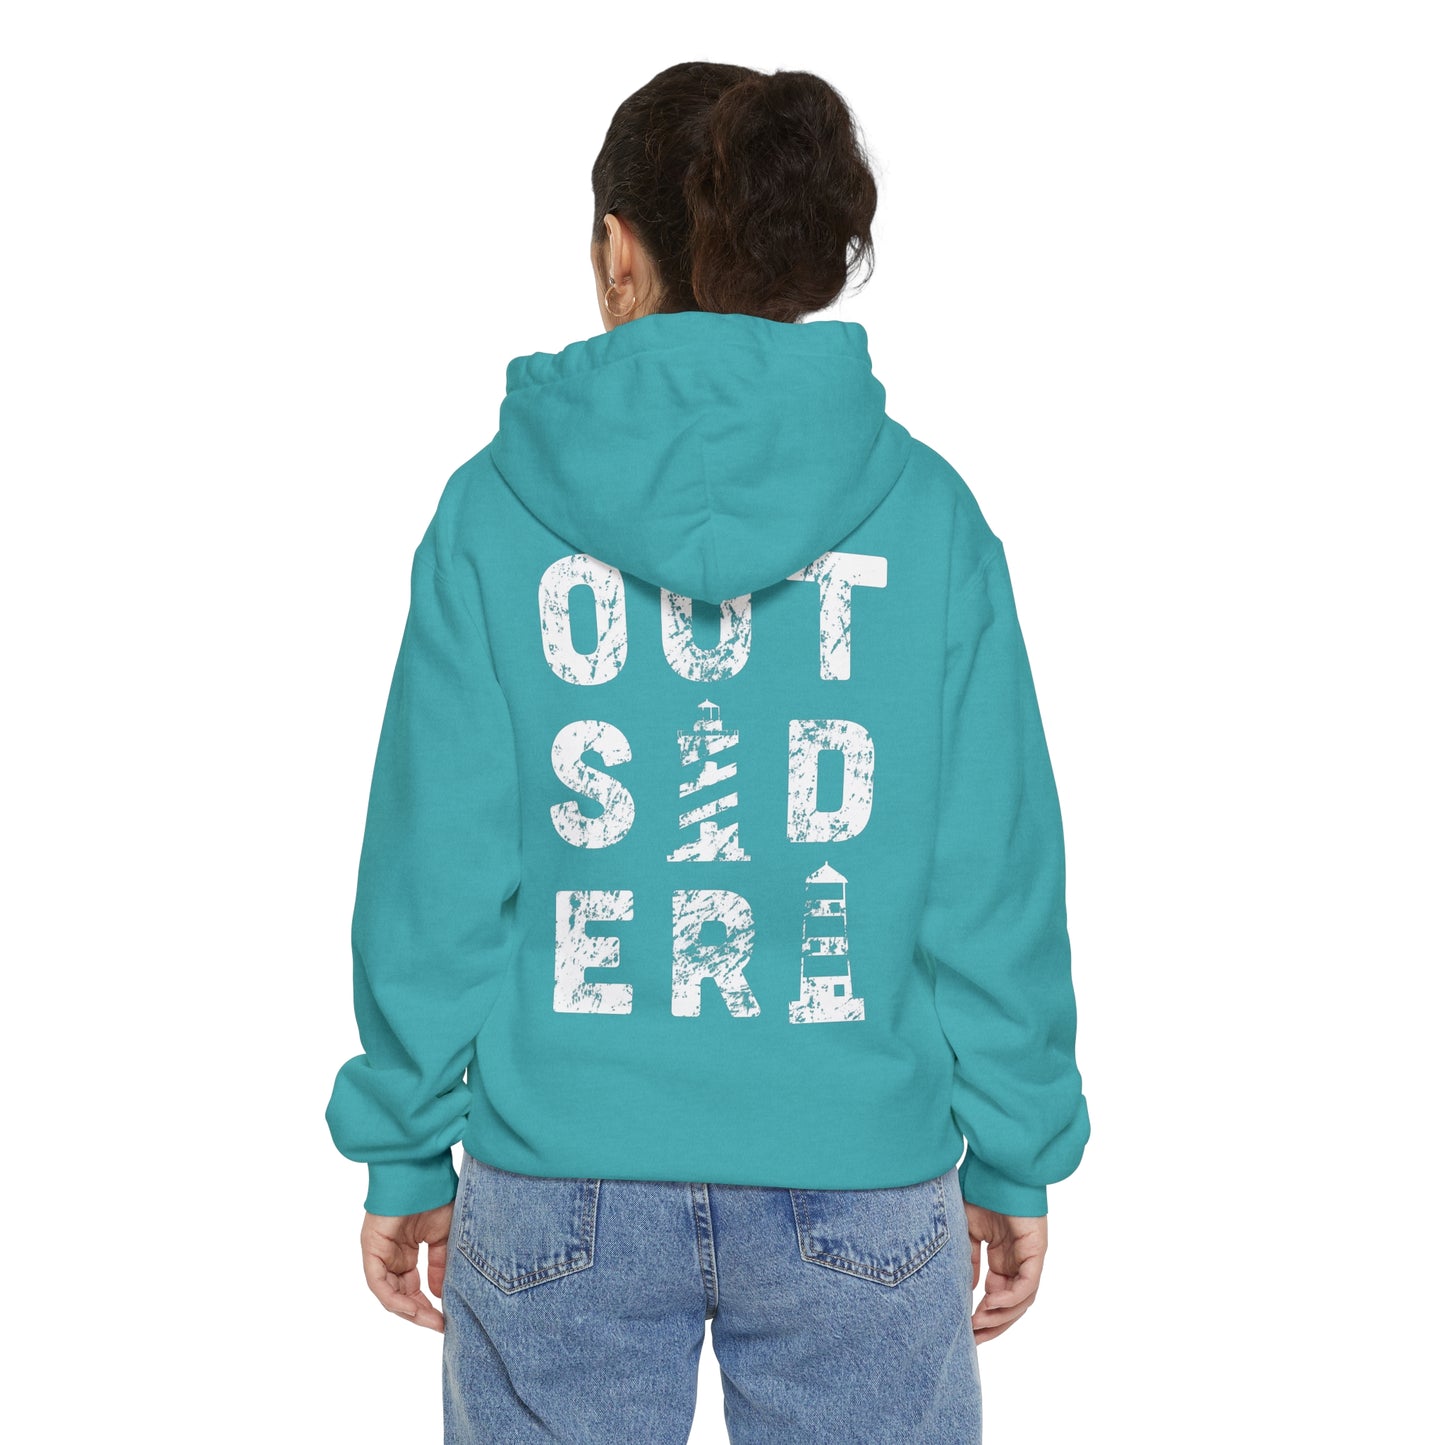 Outsider with Lighthouse (front & back) Unisex Garment-Dyed Hoodie